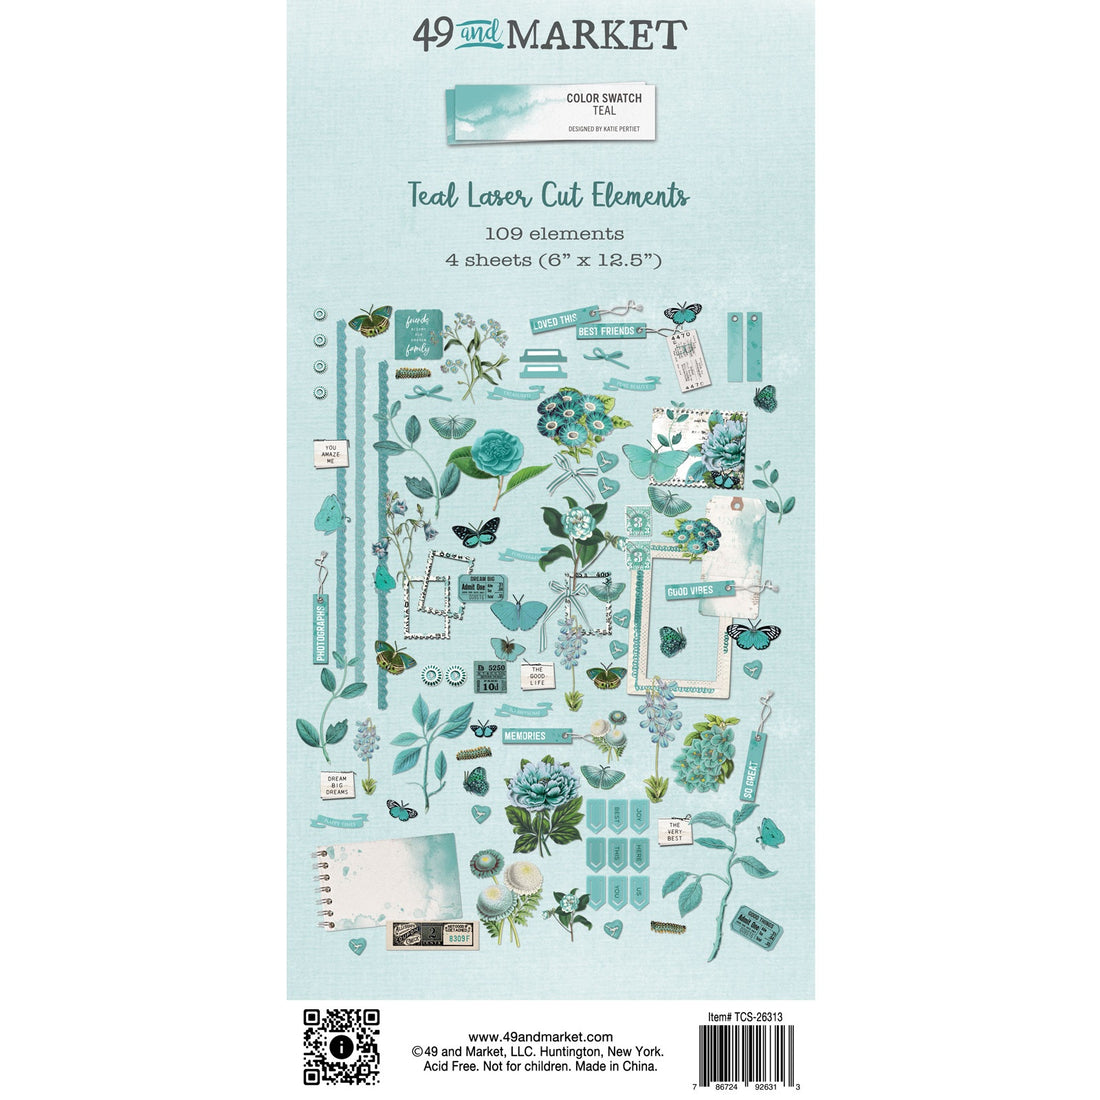 49 and Market Color Swatch TEAL LASER CUT ELEMENTS 109pc